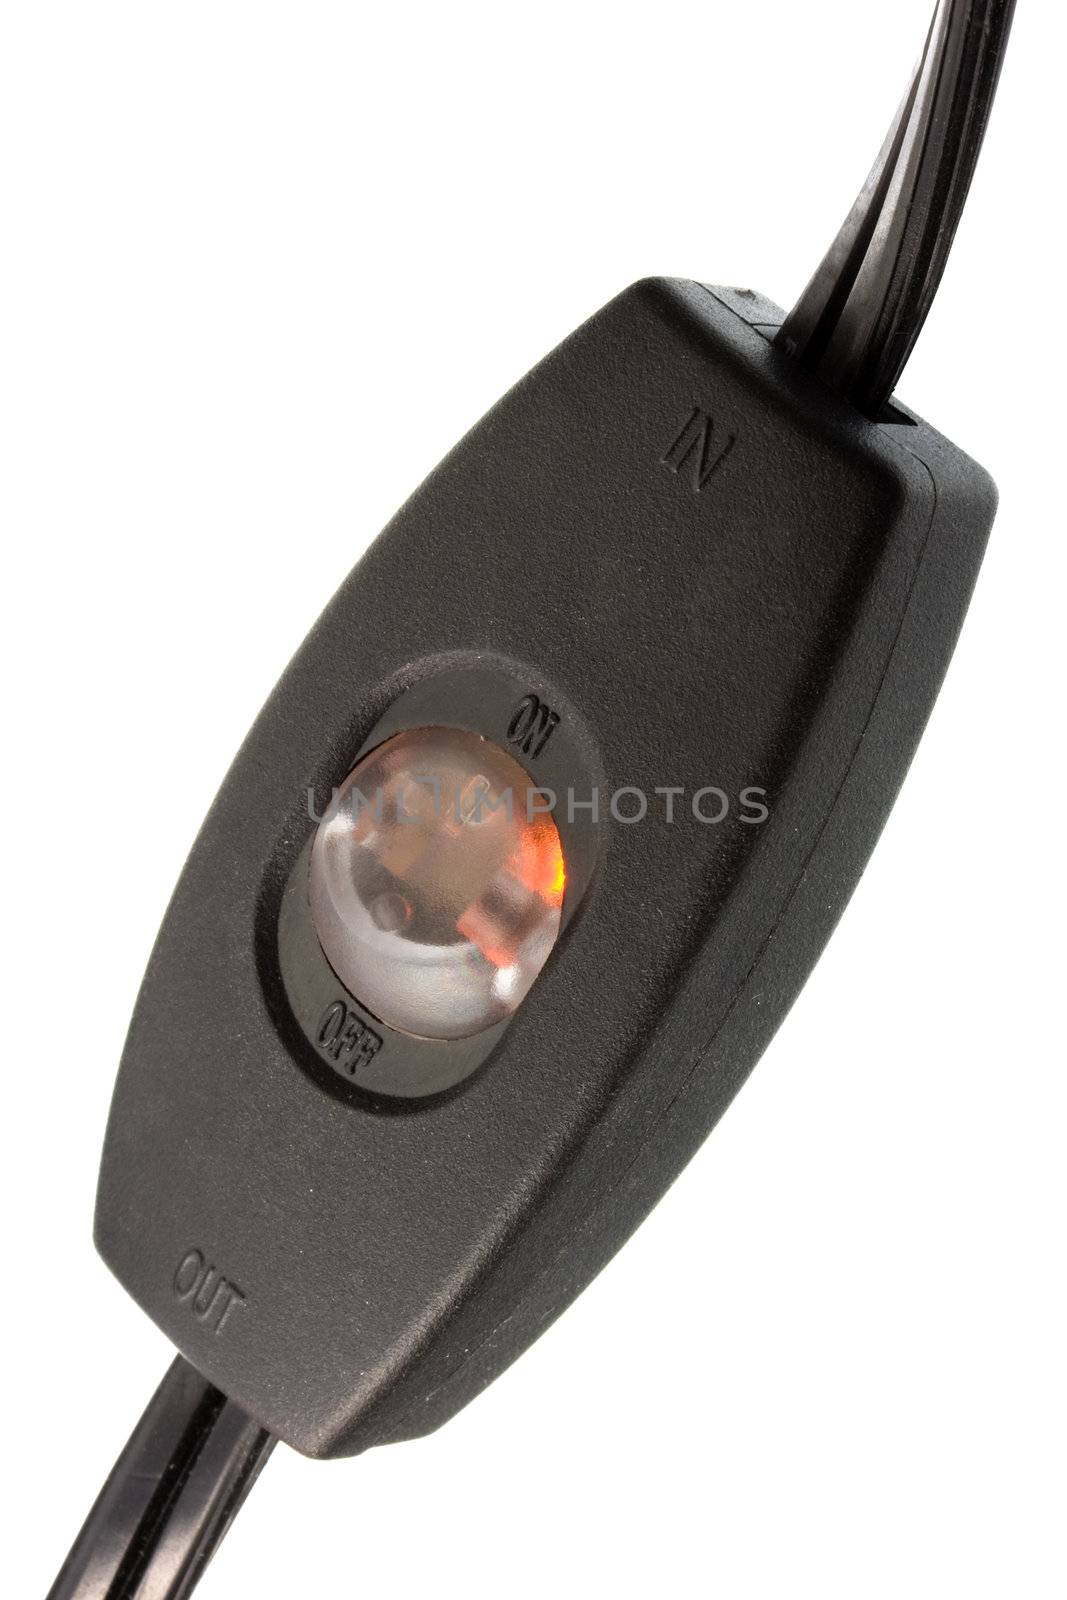 black plastic in-line electric cord switch with LED orange light: off and on, in out out marks, isolated on white